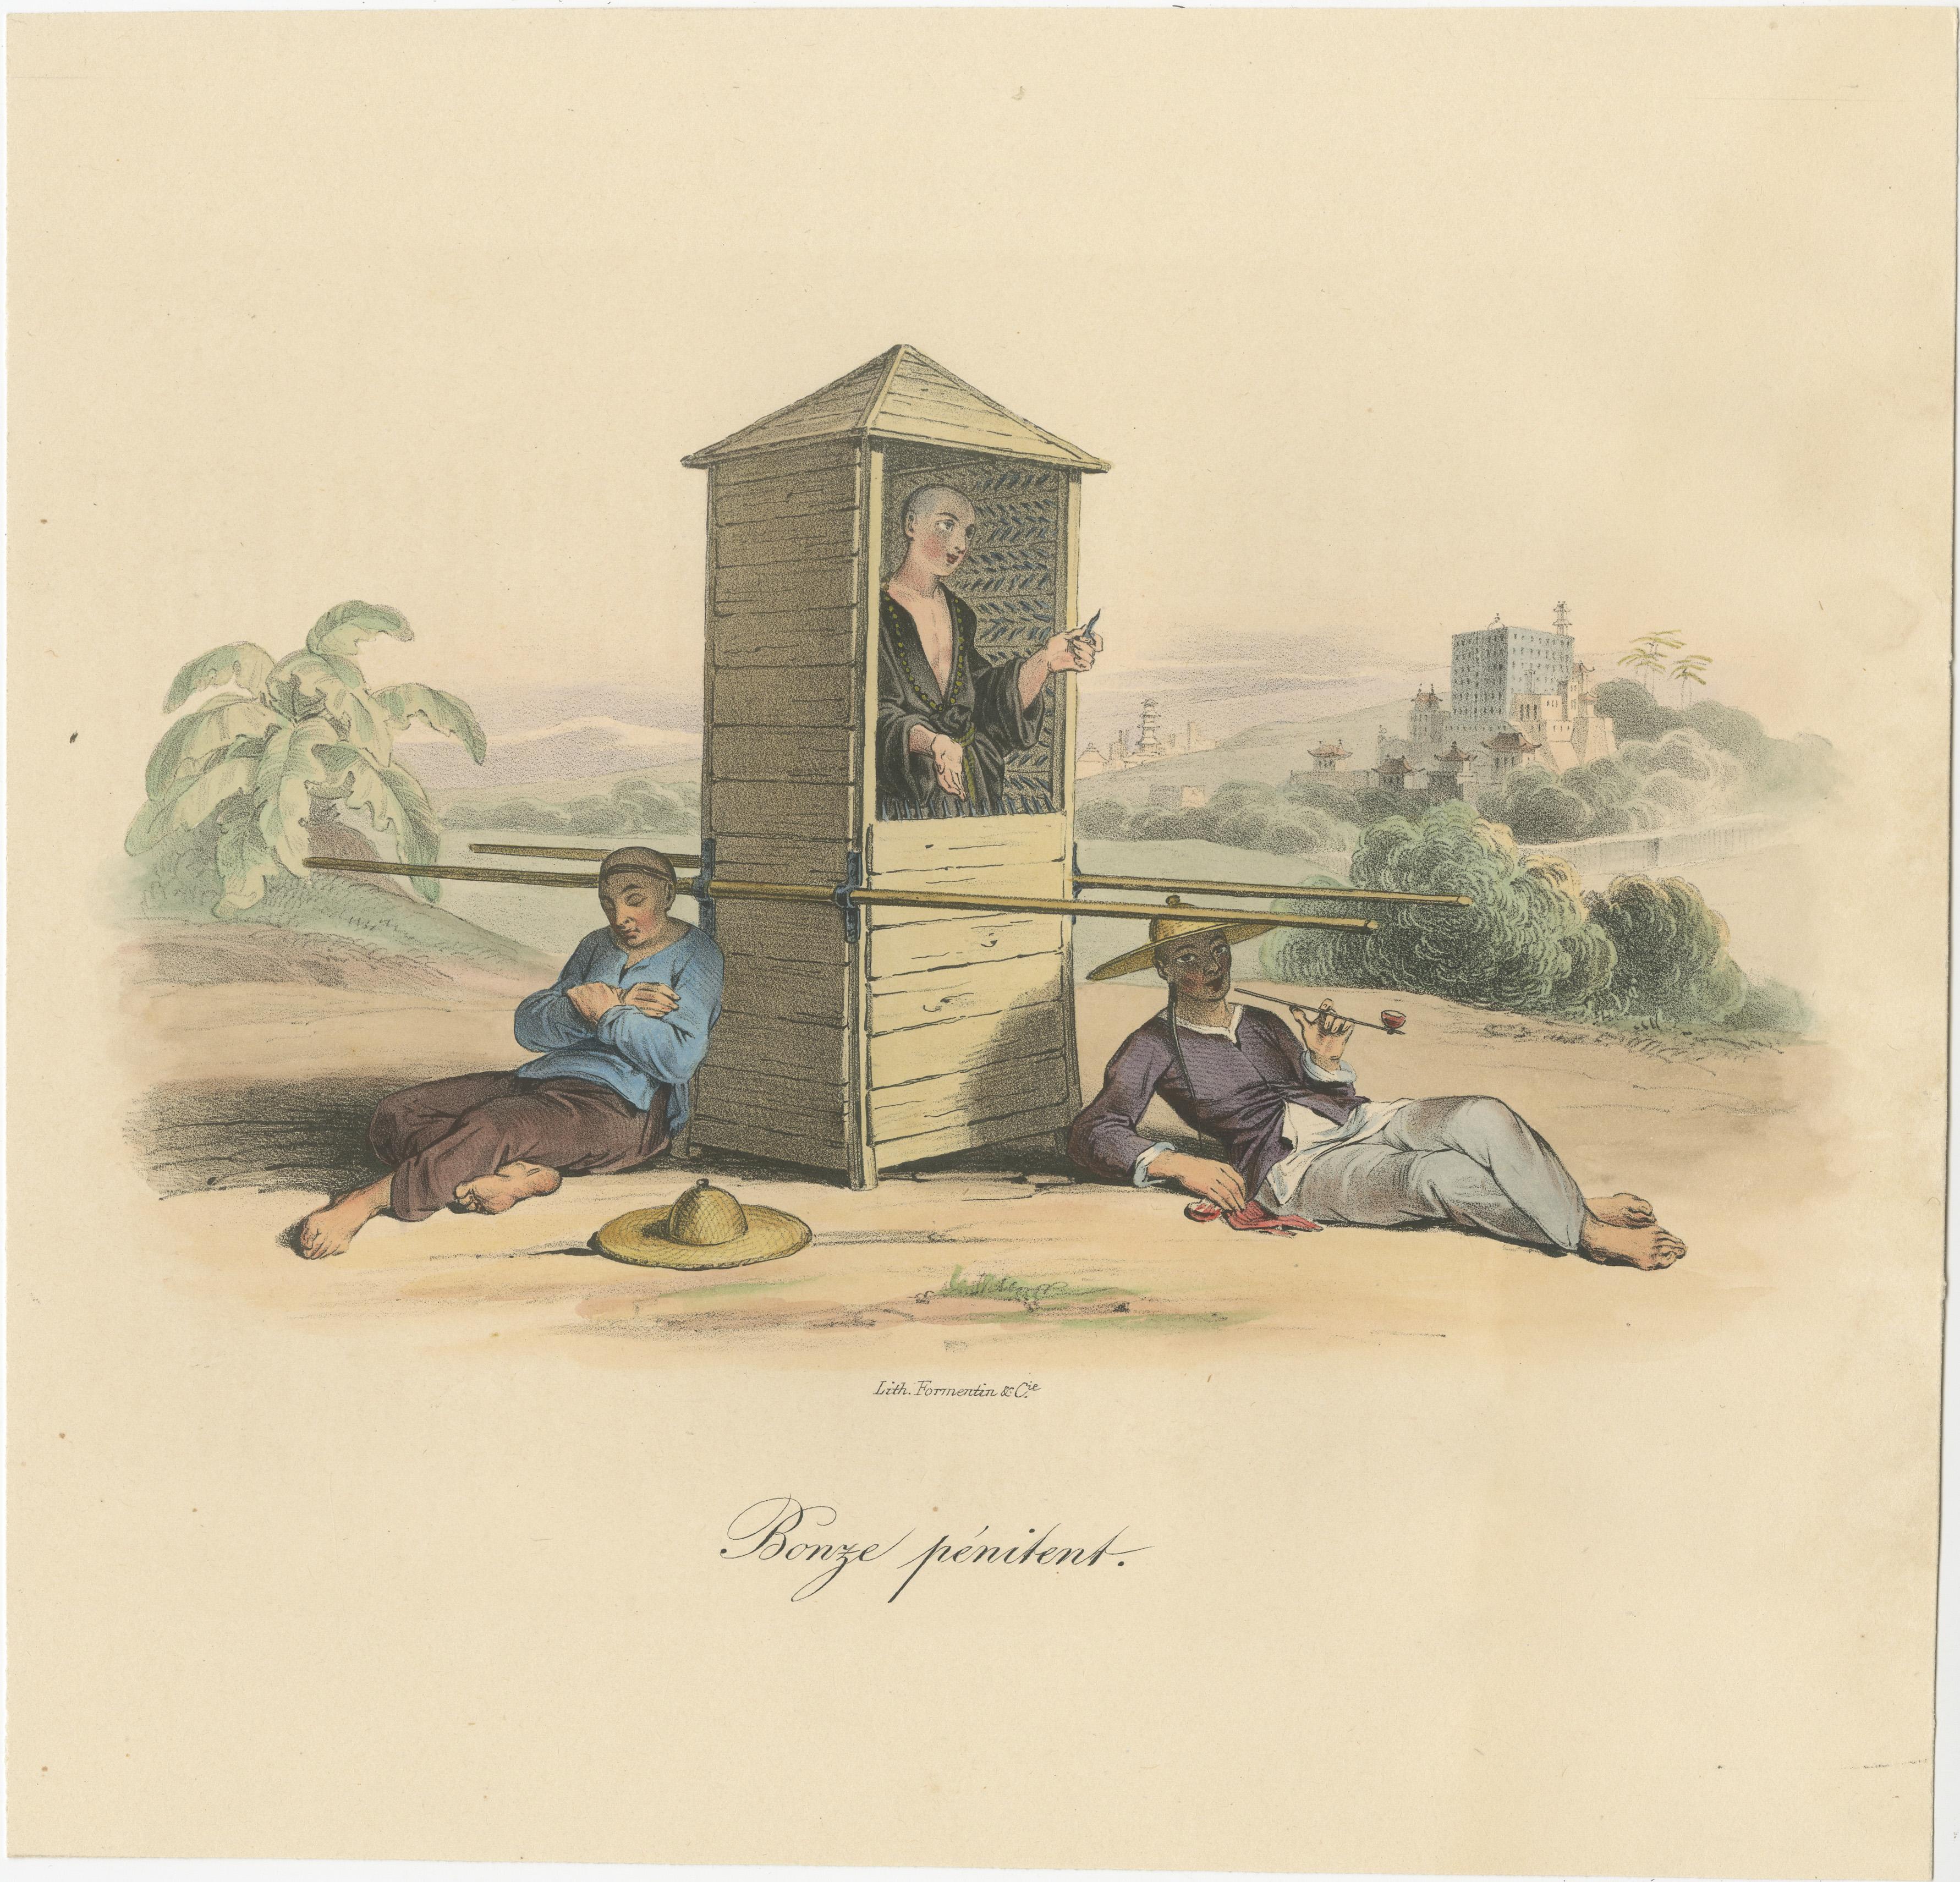 Antique print titled 'Bonze pénitent'. A shaven-headed religious man (possibly a monk) spends reflective time in a spike - lined sedan chair in China in penitent repose. Published by Formentin & Cie, circa 1830.